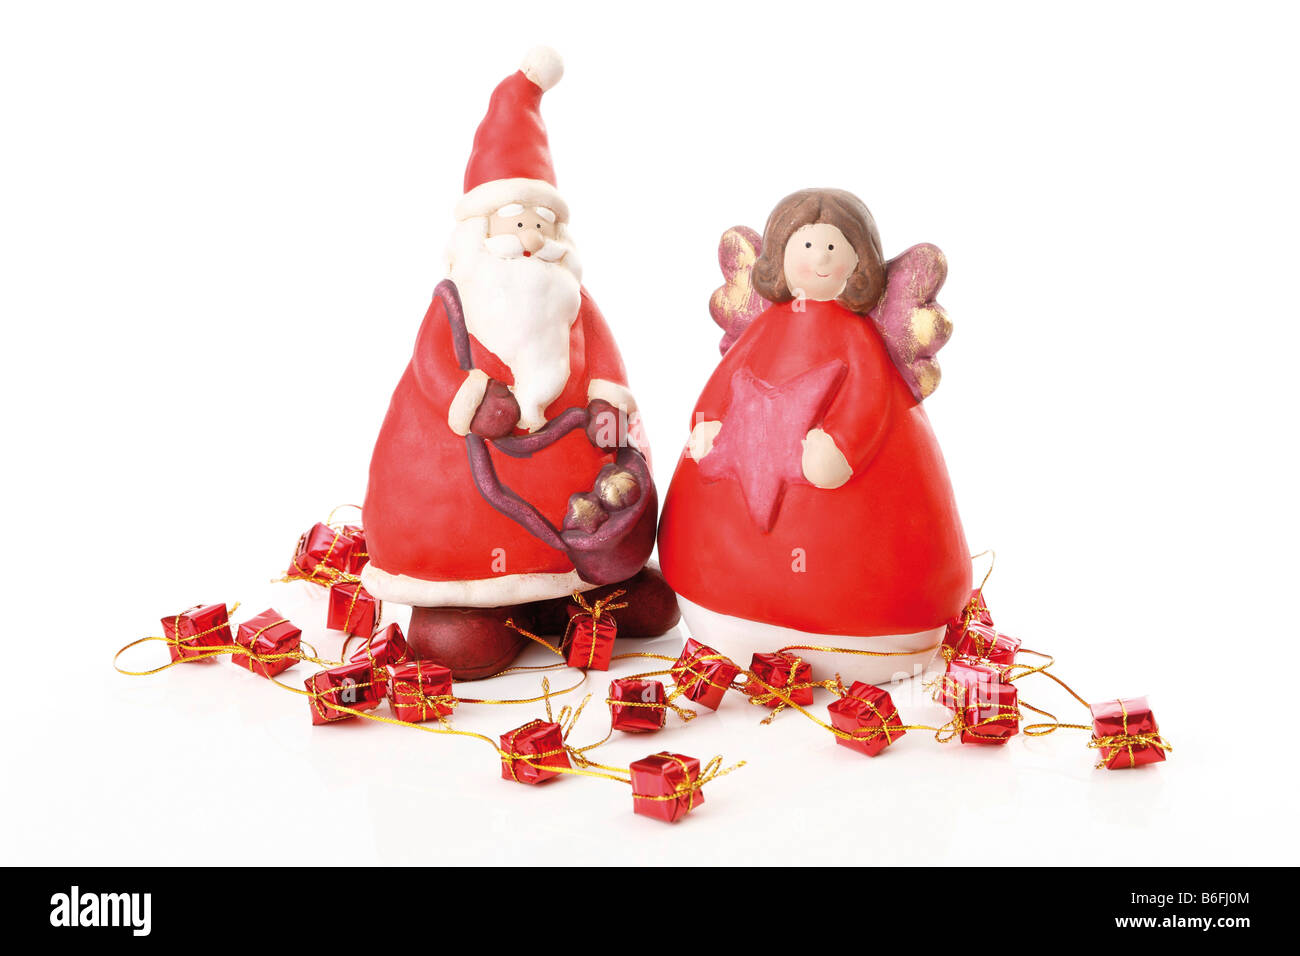 Father Christmas and angel figurines with presents Stock Photo